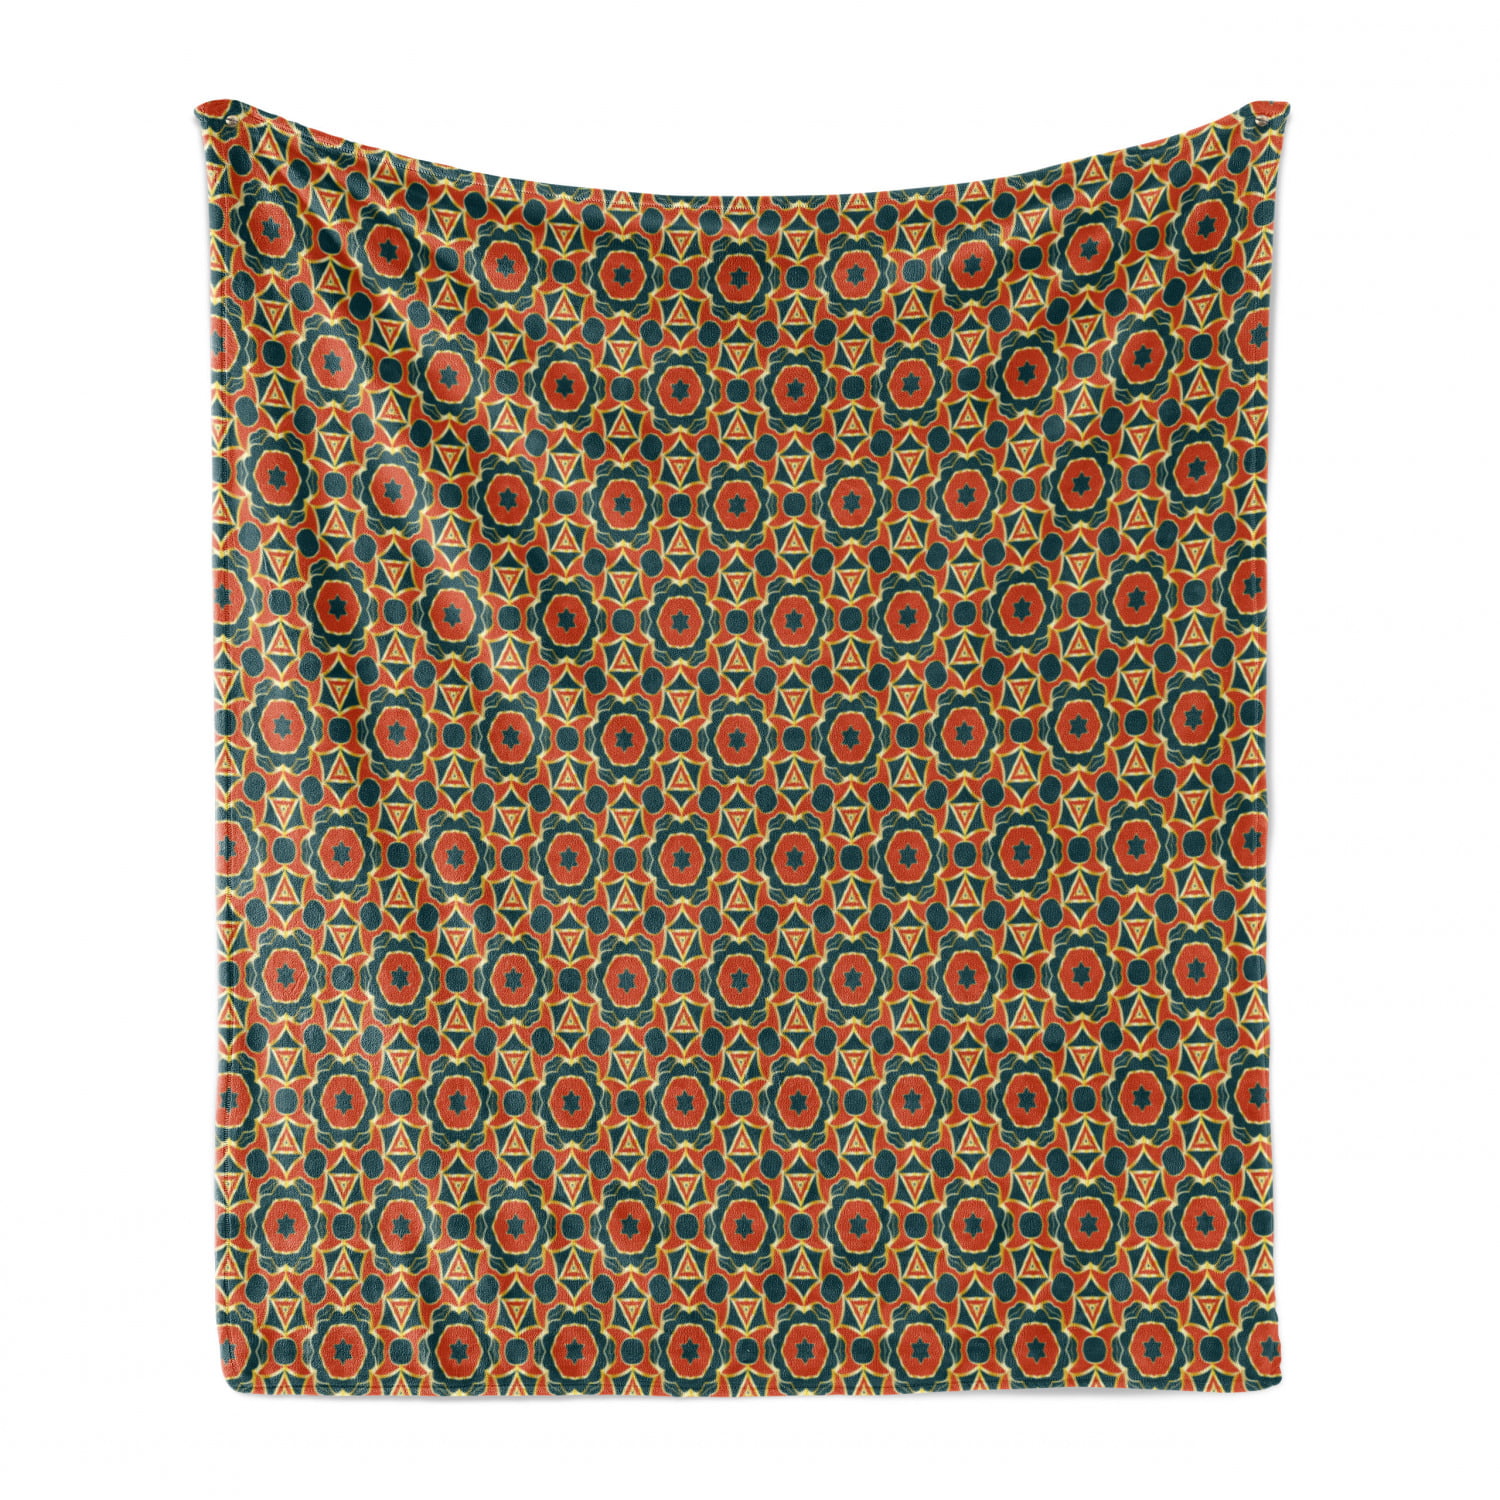 Ambesonne Brown and Blue Soft Flannel Fleece Throw Blanket Retro Daisy Pattern with Polka Dot Background Abstract Design Cozy Plush for Indoor and Outdoor Use Brown Pale Seafoam Umber 60 x 80 